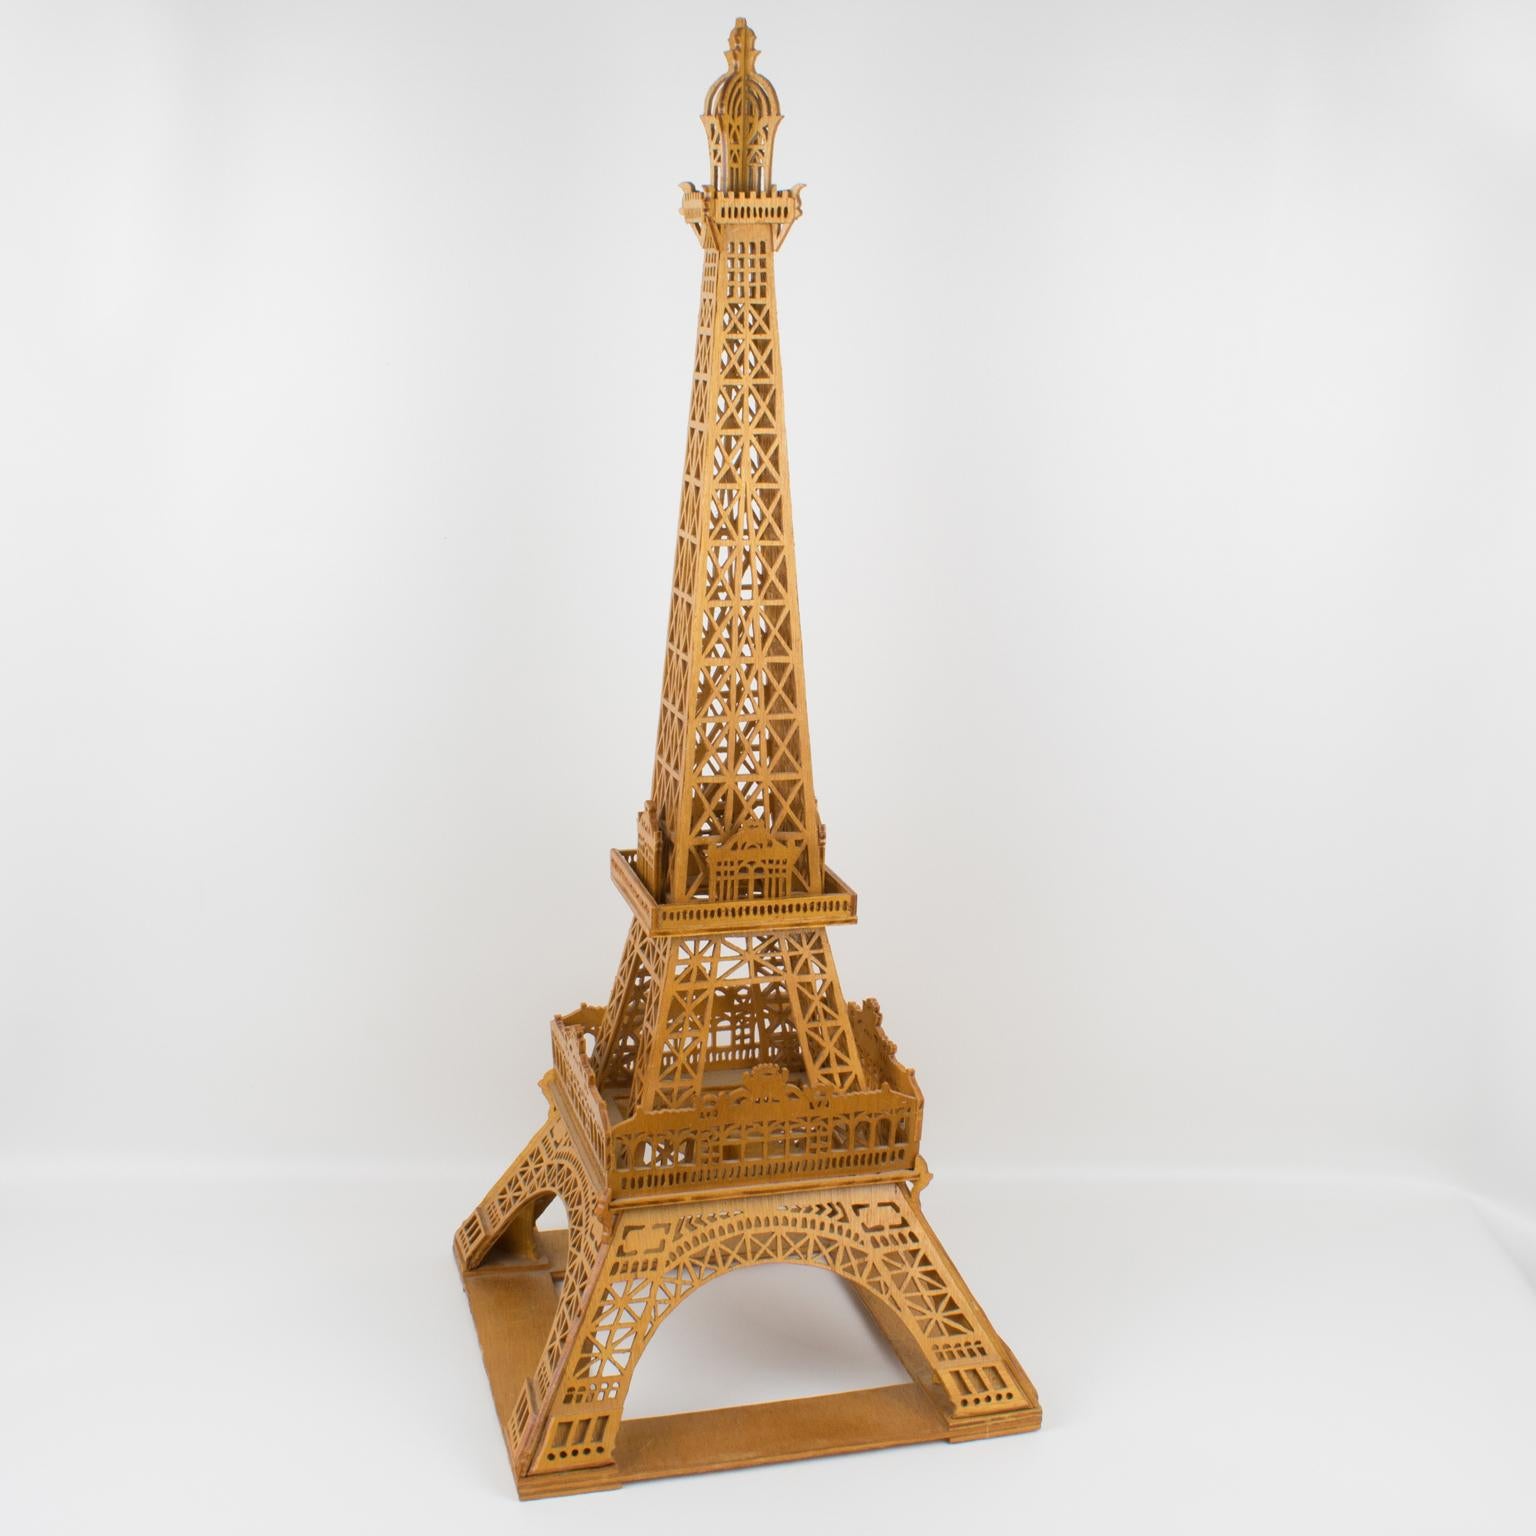 French Hand-Carved Wooden Eiffel Tower Model Miniature Sculpture 1